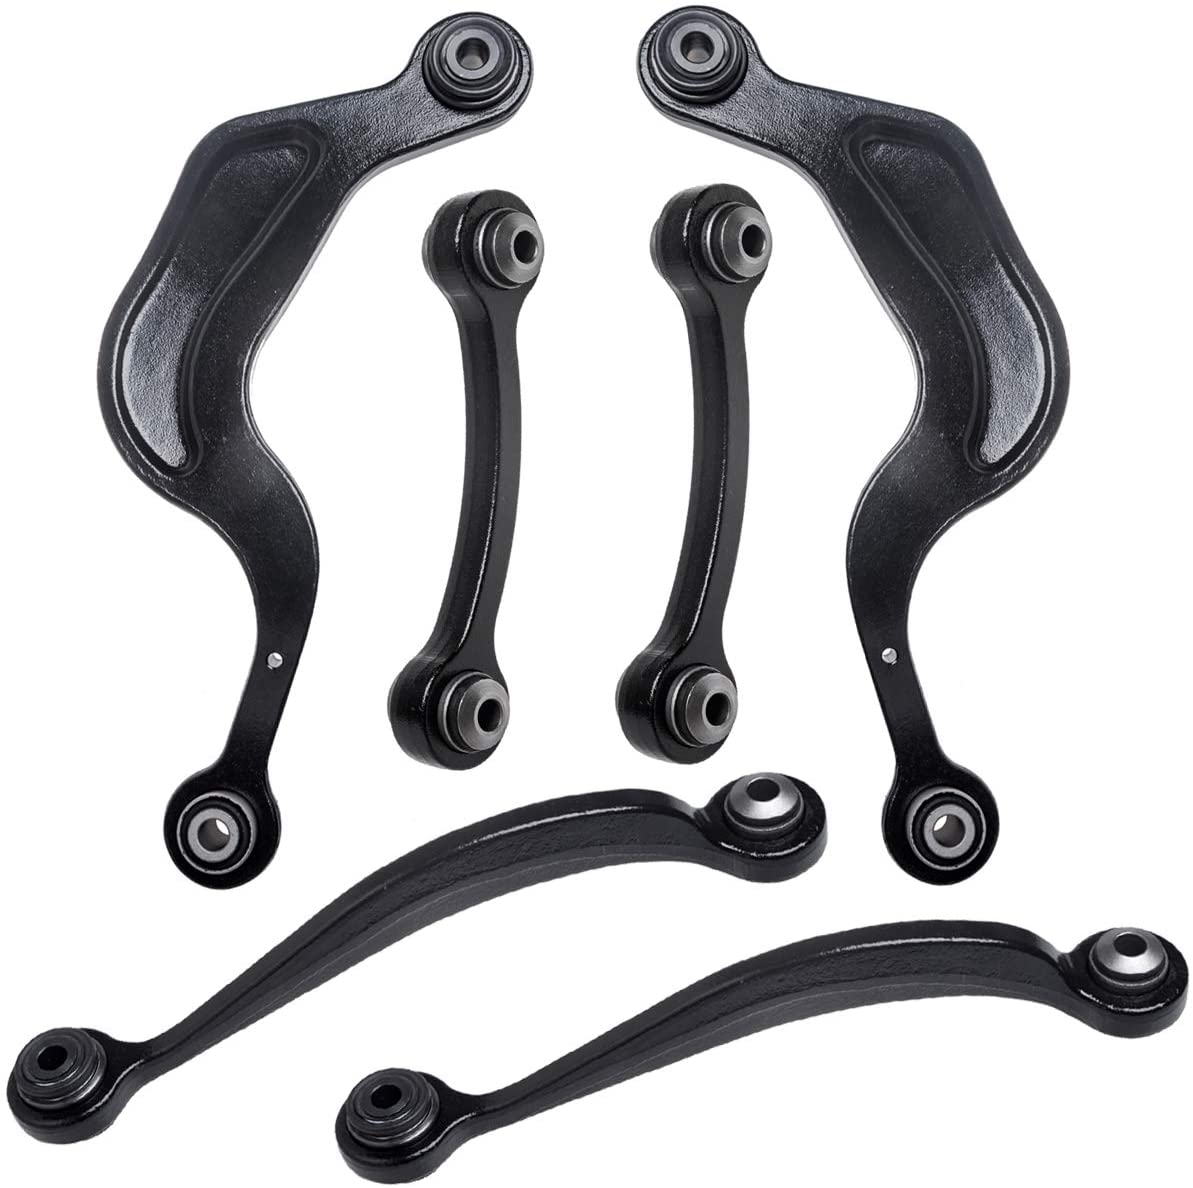 TUCAREST 6Pcs Rear Suspension Kit Rear Upper Control Arm Compatible With 08-15 Buick Enclave [09-15 Chevrolet Traverse ] 07-15 GMC Acadia [07-10 Saturn Outlook ] Lateral Link